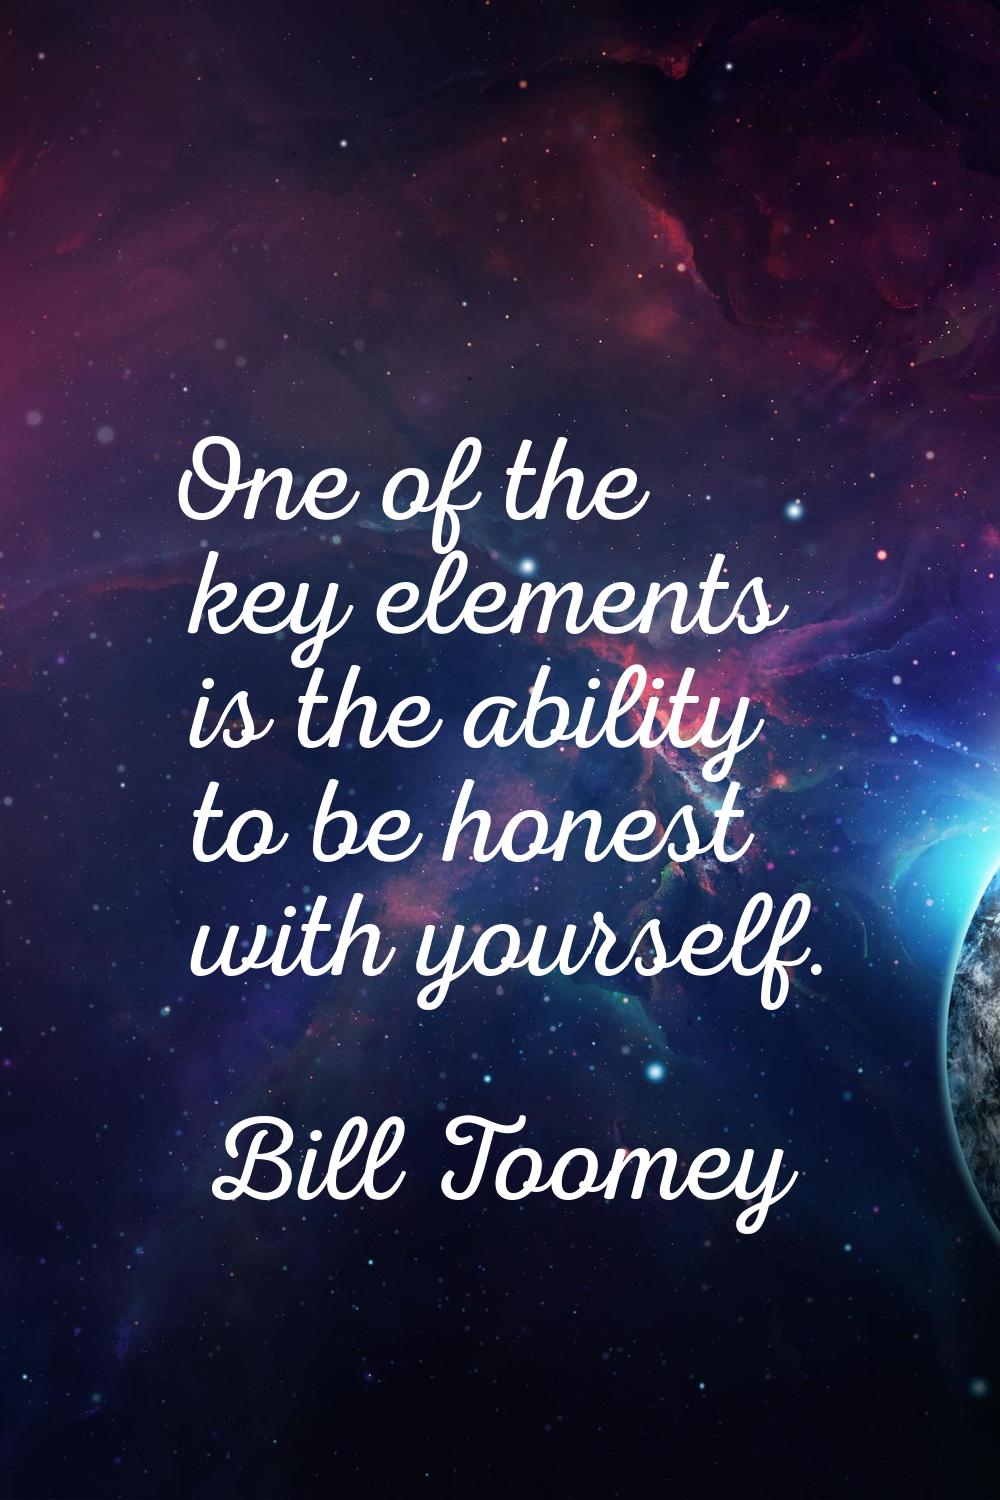 One of the key elements is the ability to be honest with yourself.